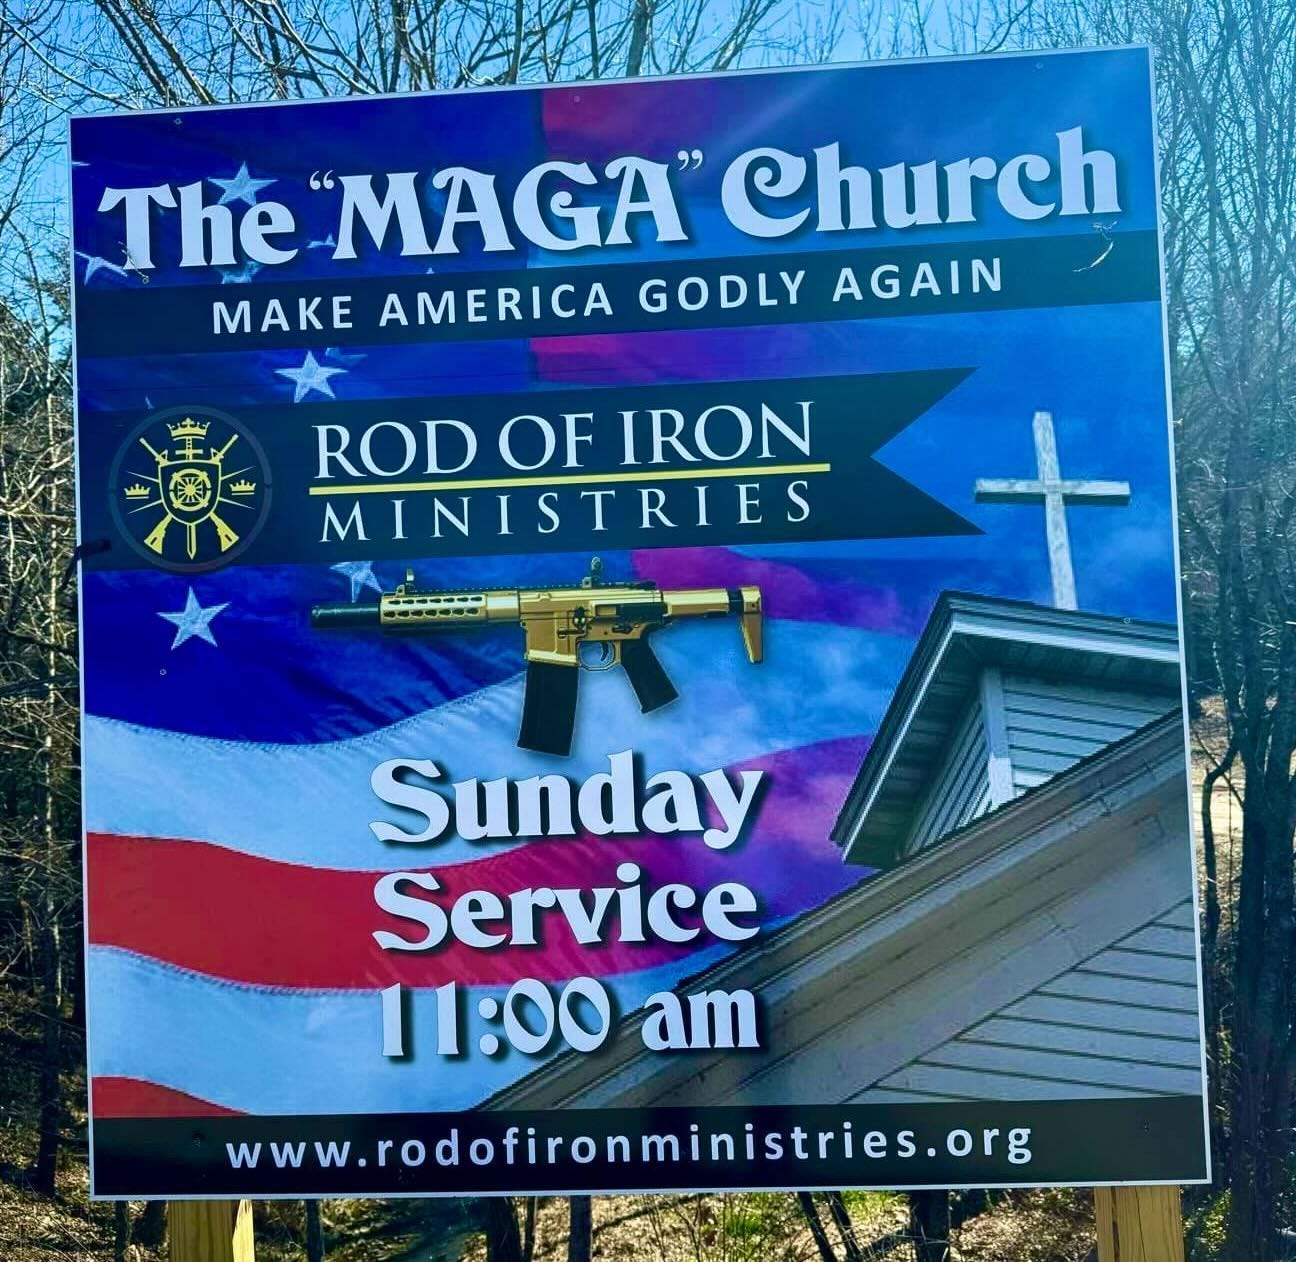 Photo by Lakota_Man 🪶 on February 20, 2024. May be an image of ‎banner, signboard, magazine, poster and ‎text that says '‎The " MAGA Church AGAIN MAKE AMERICA GODLY سليى ROD RODOFIRON OF IRON MINISTRIES Sunday Service W1:00 am www.rodofironministries.org w w wWw‎'‎‎.